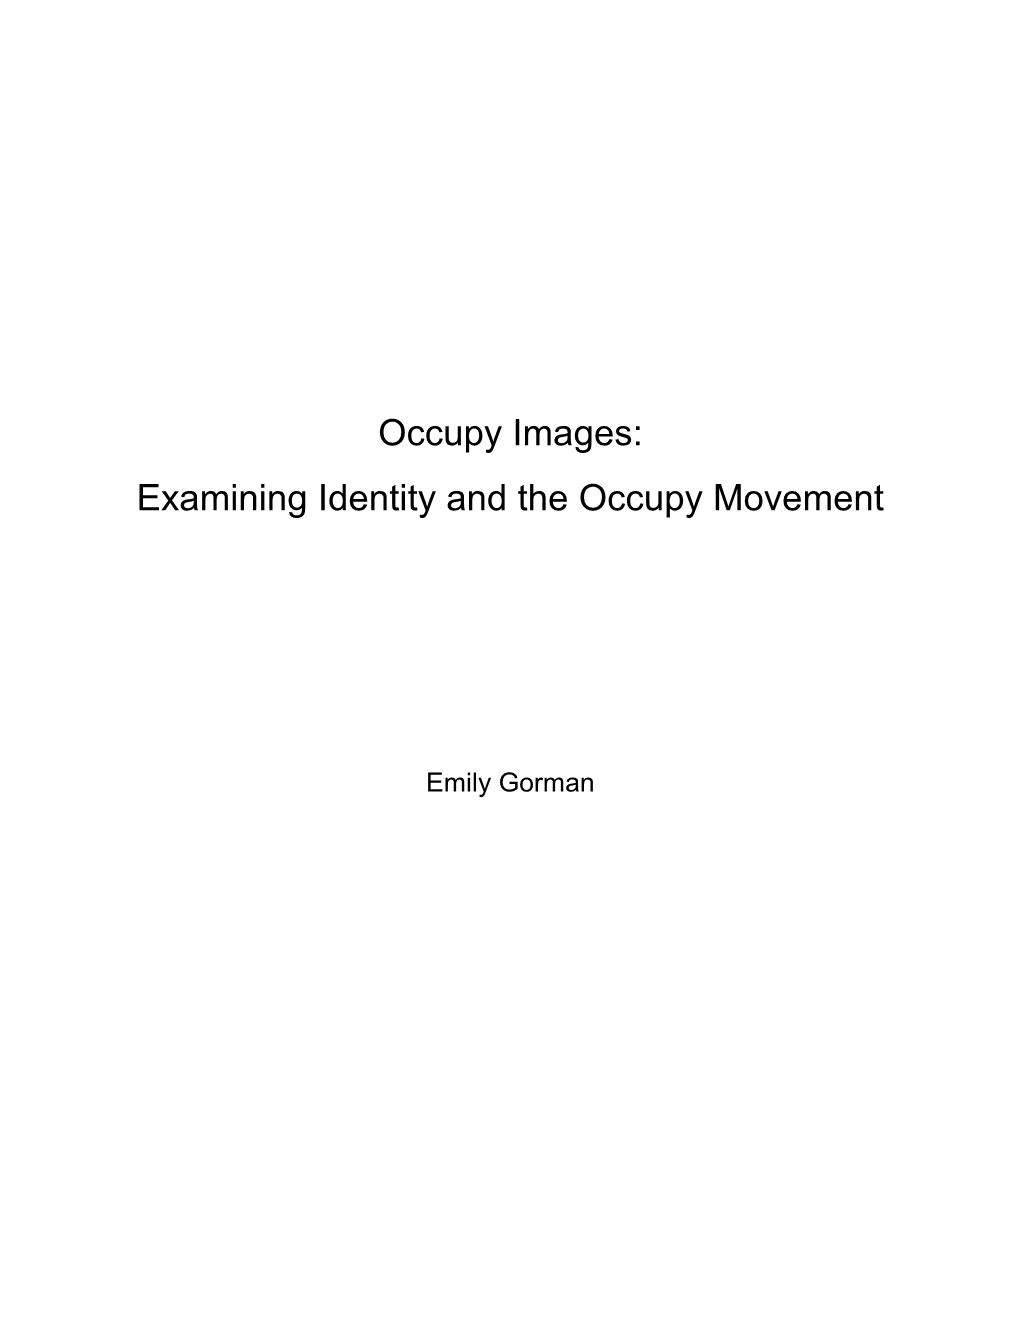 Examining Identity and the Occupy Movement